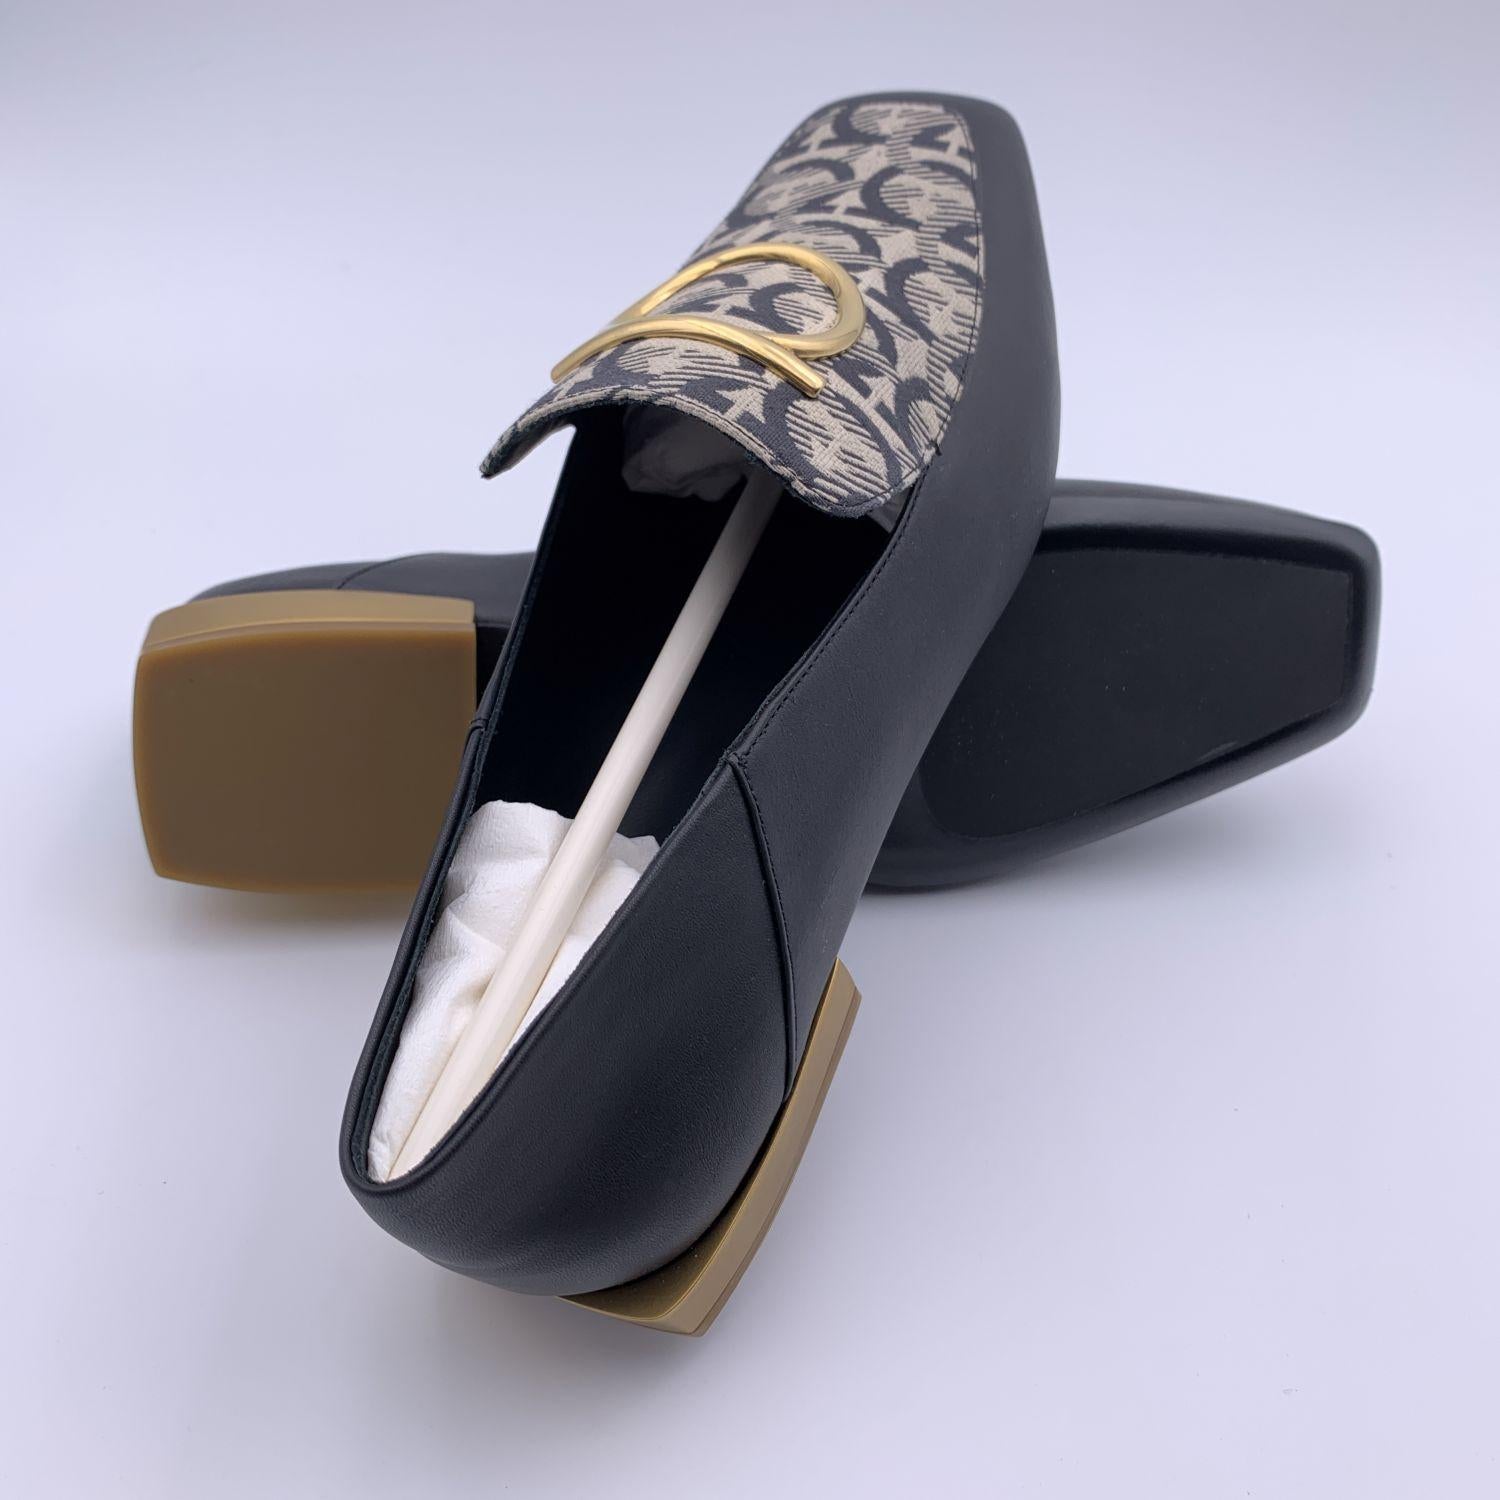 Beautiful Salvatore Ferragamo 'Lana T 1' Moccassins Loafers Shoes. Crafted in black leather leather. They feature a fabric insert on top with all-over Gancini logo pattern, big gold metal Gancino detailing, a square toe and slip-on design. Leather